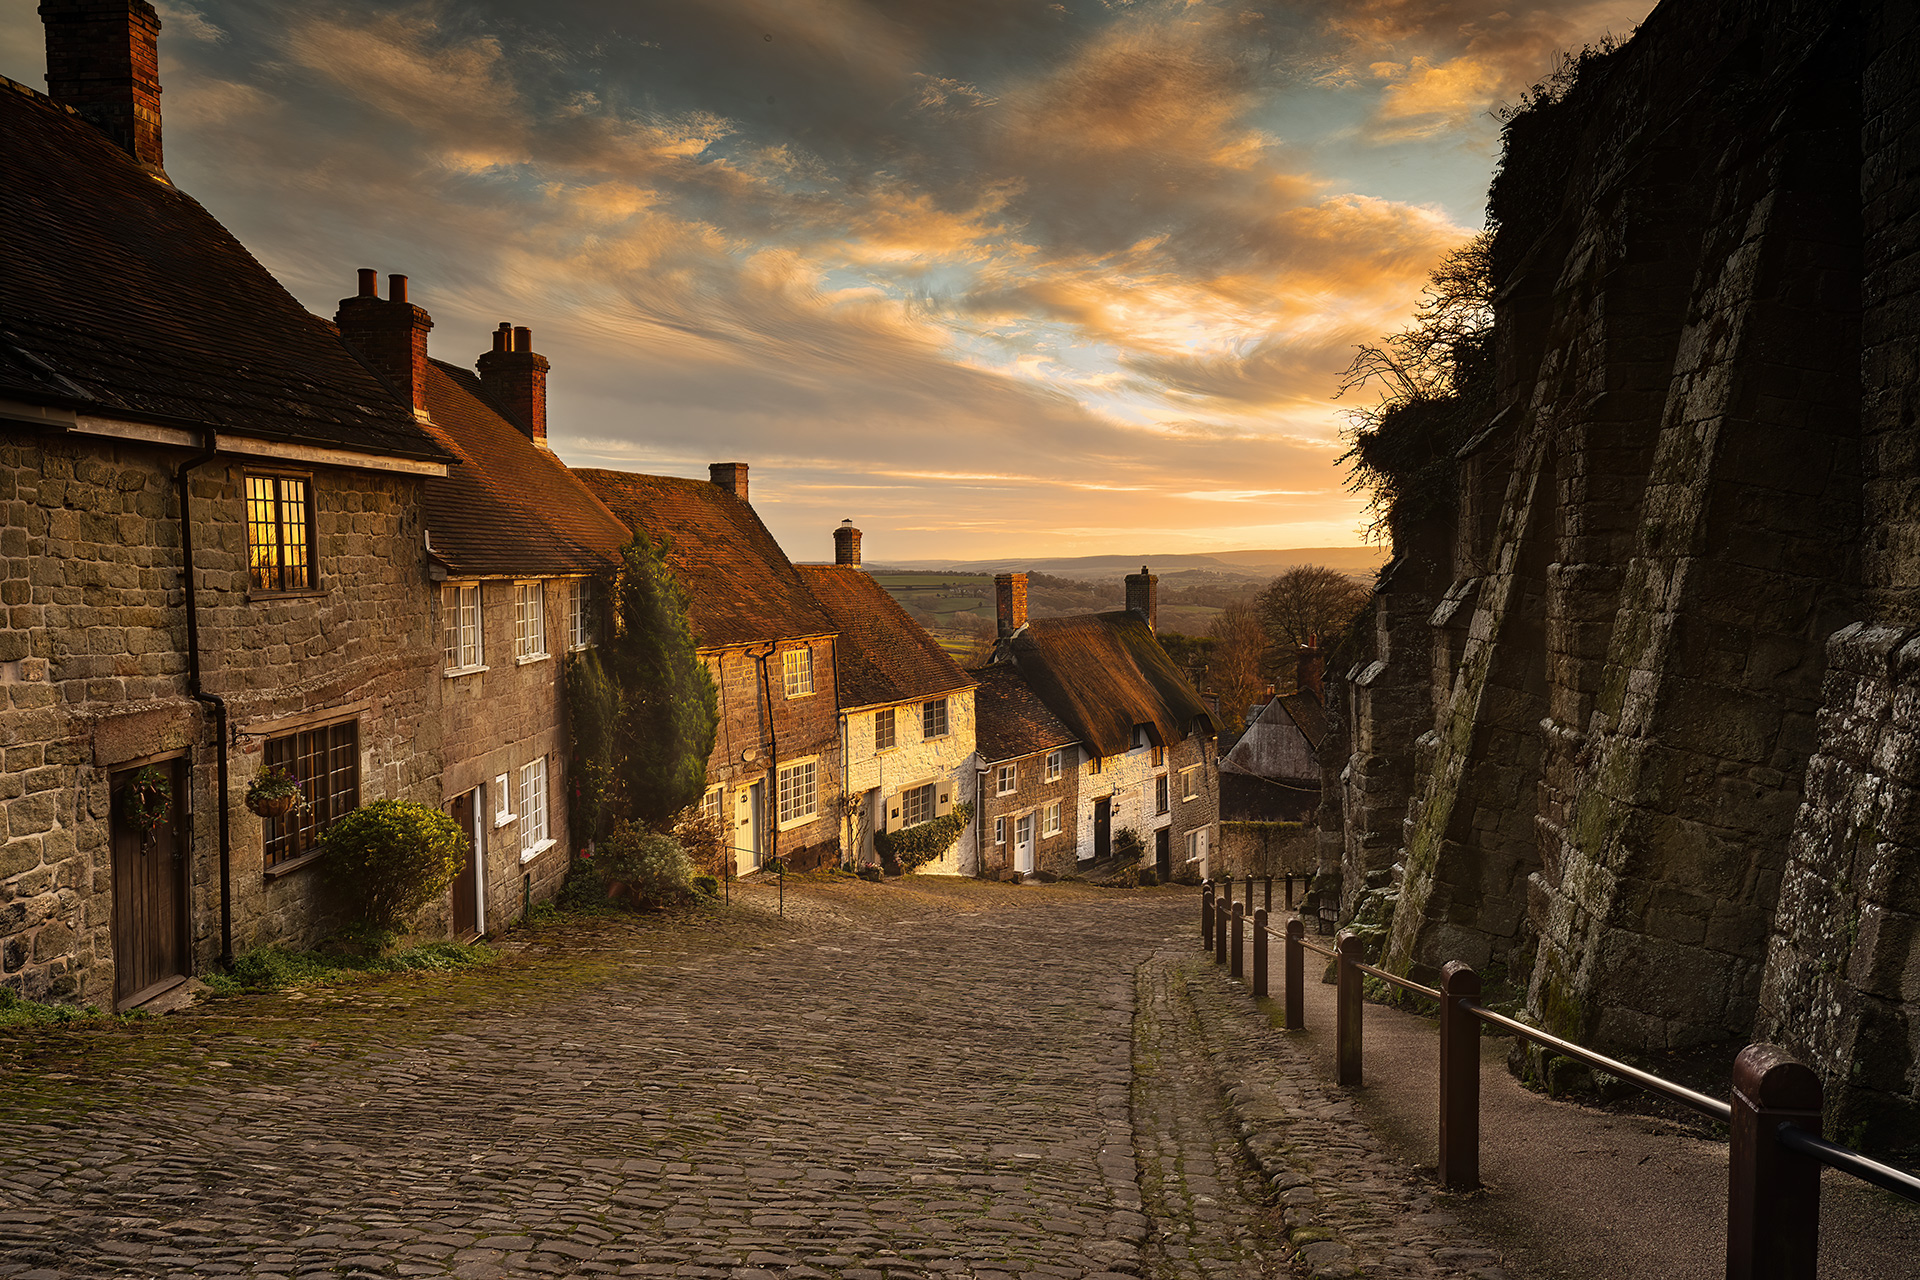 Gold Hill from the Hovis Advert